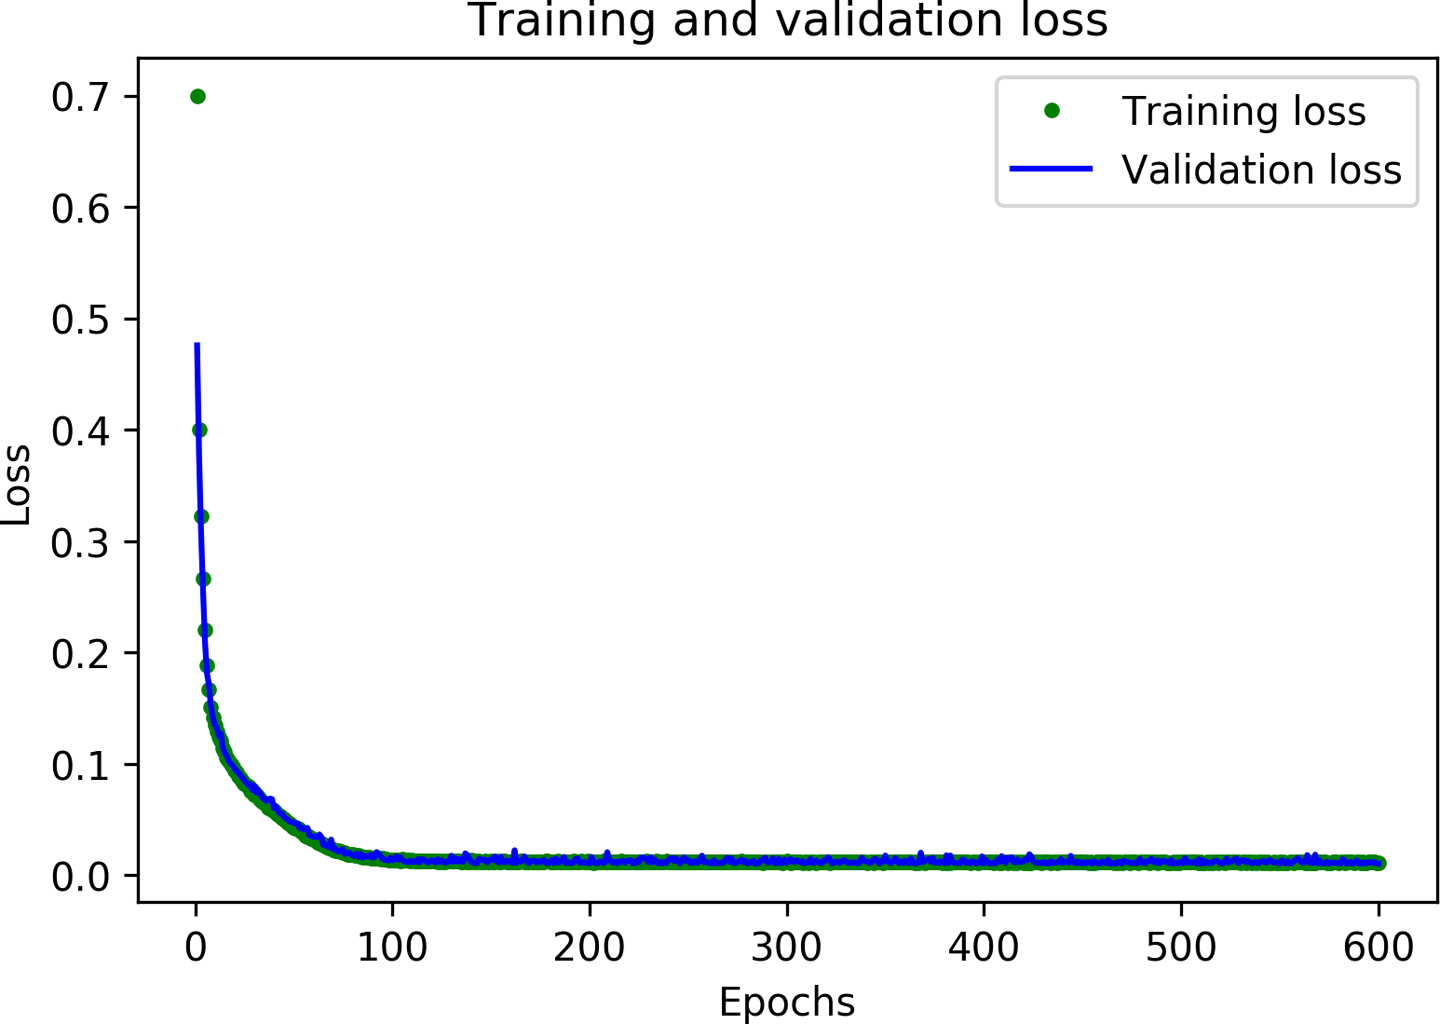 A graph of training and validation loss